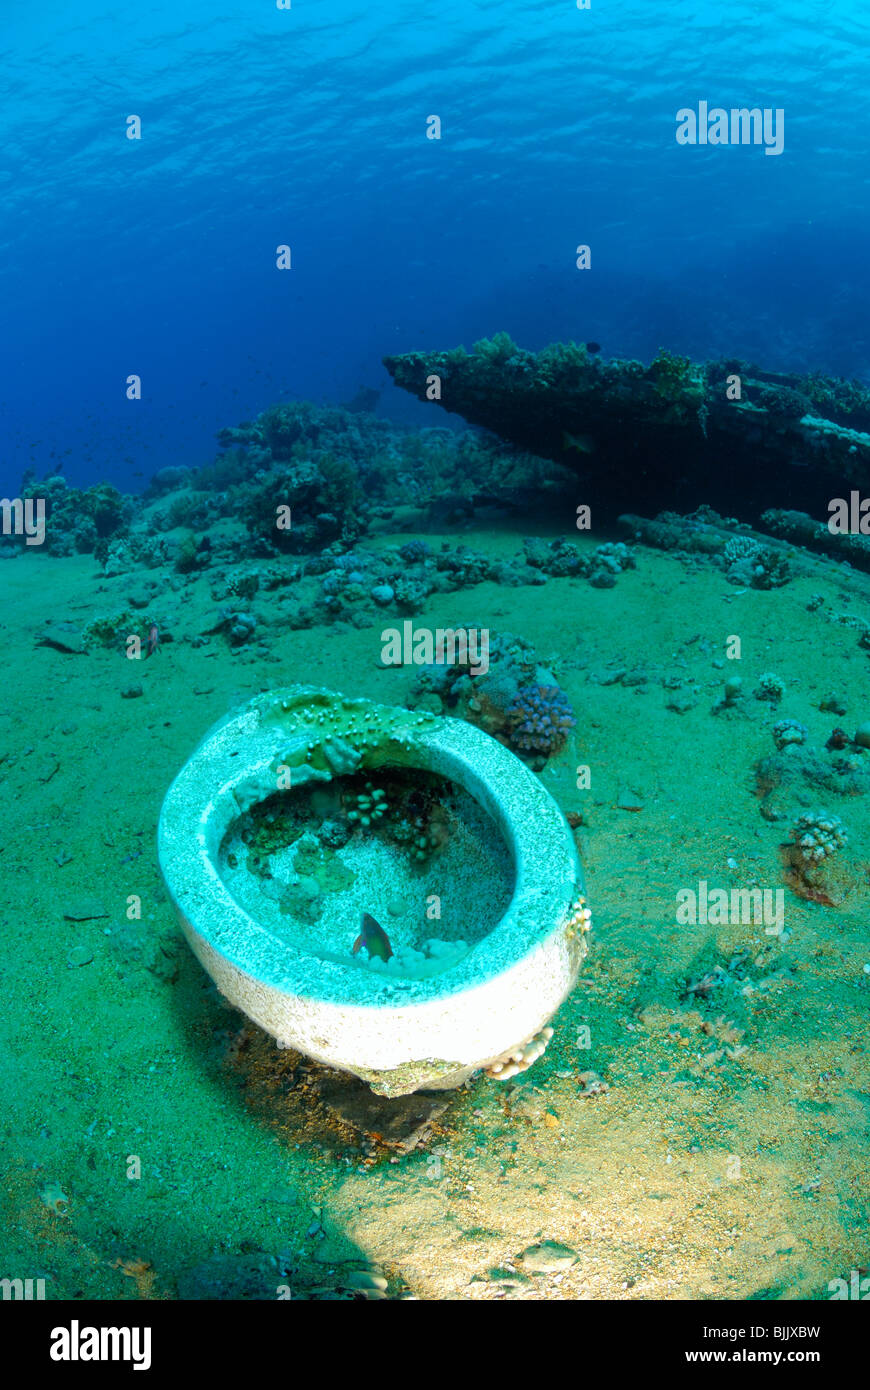 Wreck at Yolanda reef  in the Red Sea, off coast of Egypt. Stock Photo